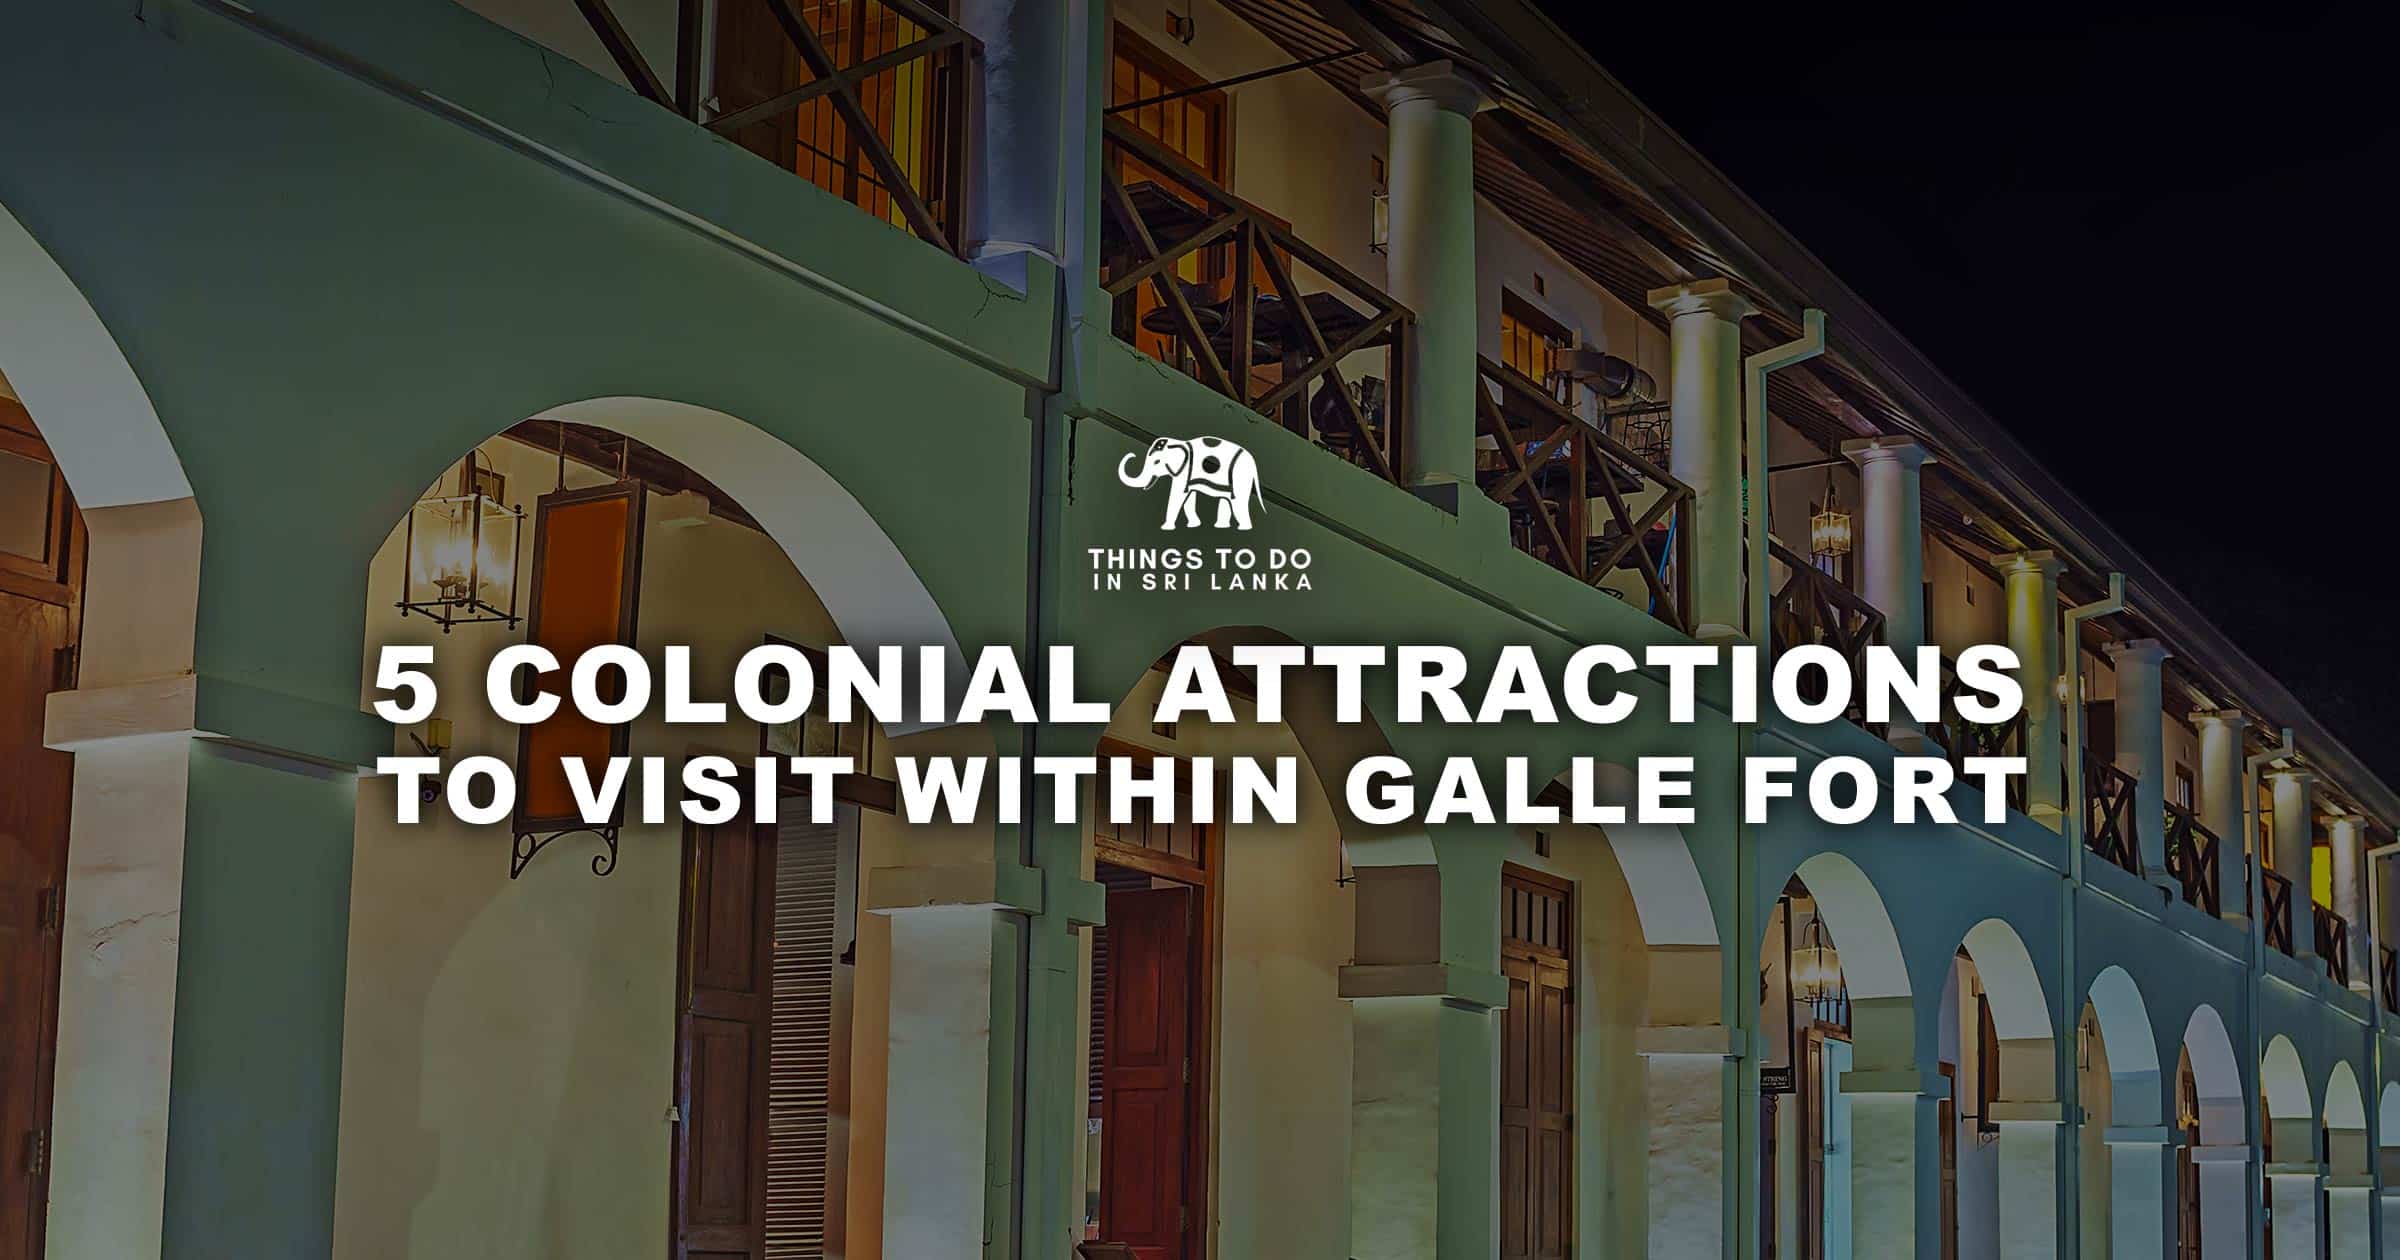 5 Colonial Attractions to Visit Within Galle Fort